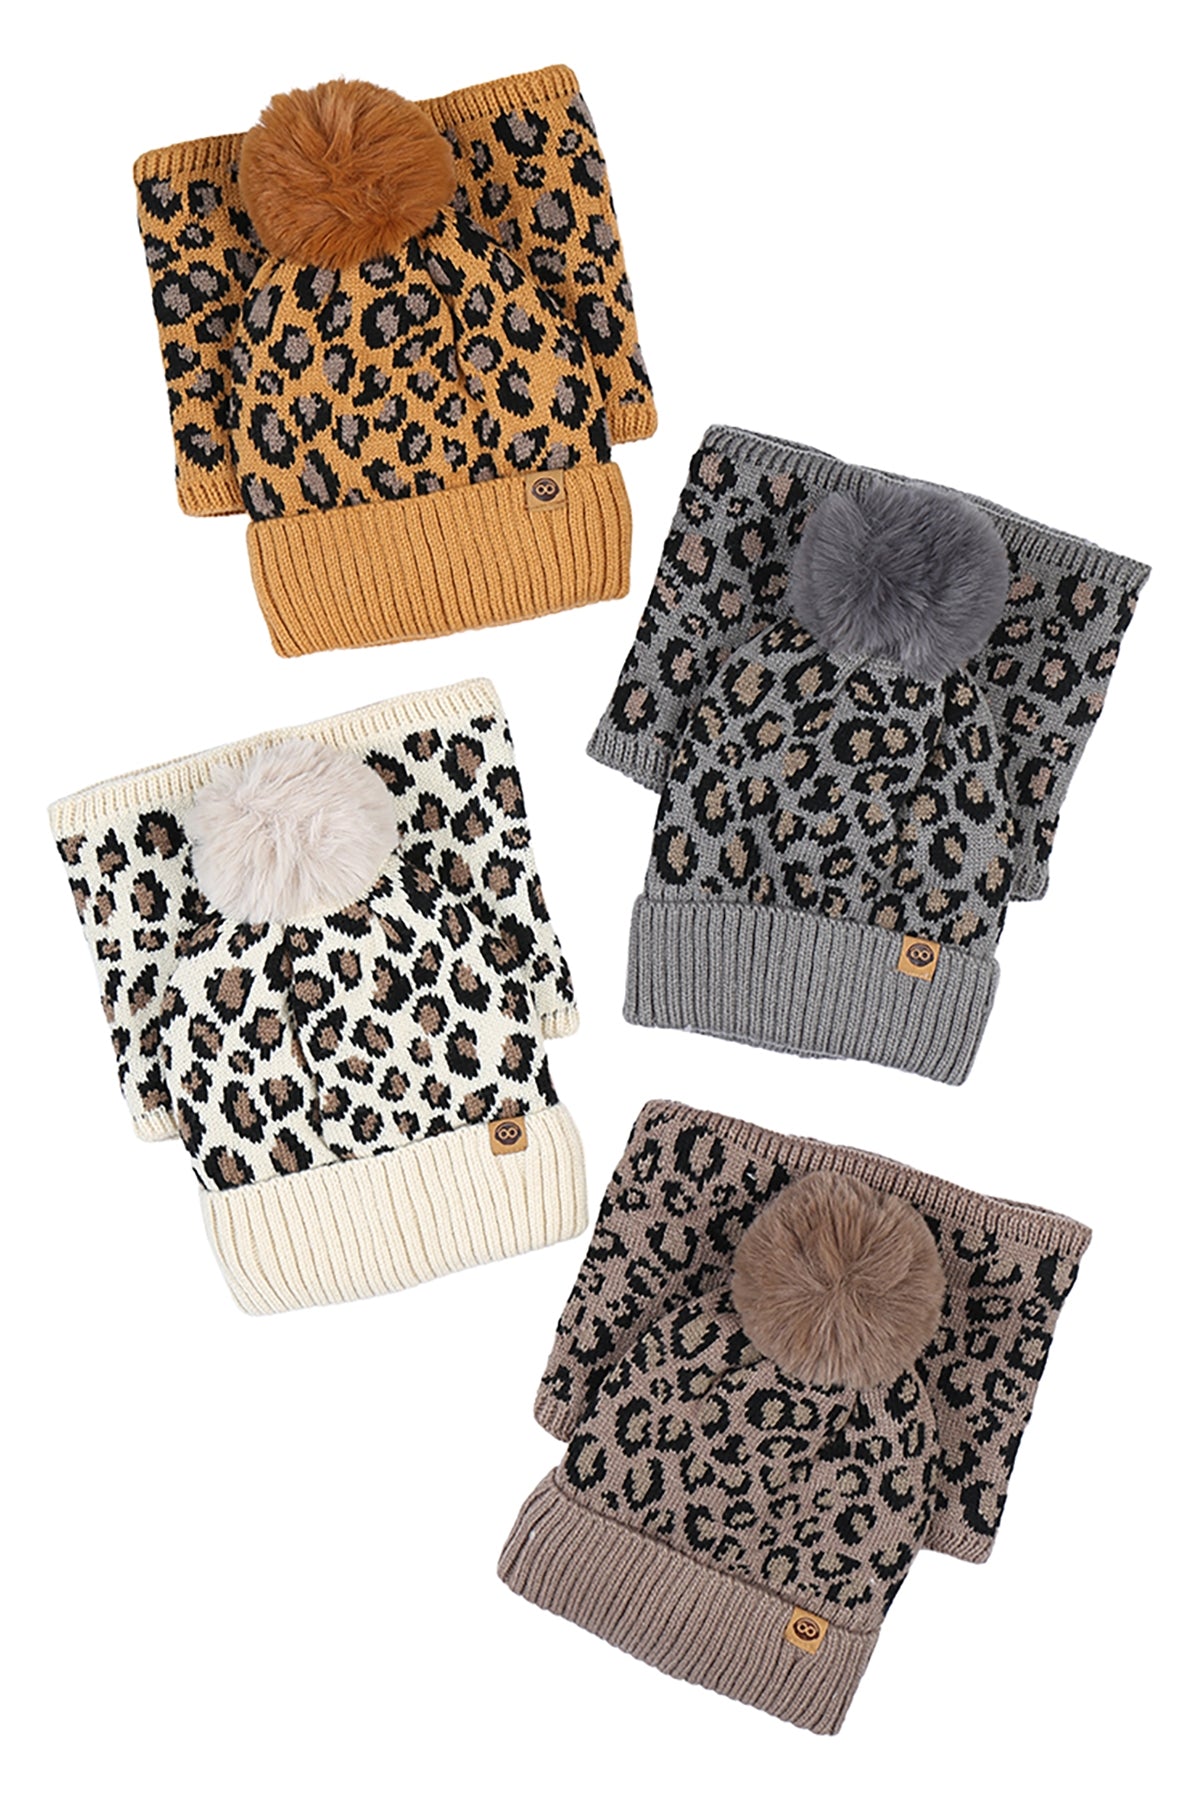 S29-1-1-WSHT-409-FLEECE LINED LEOPARD BEANIE WITH INFINITY SCARF 4 ASSORTED COLORS/12PCS